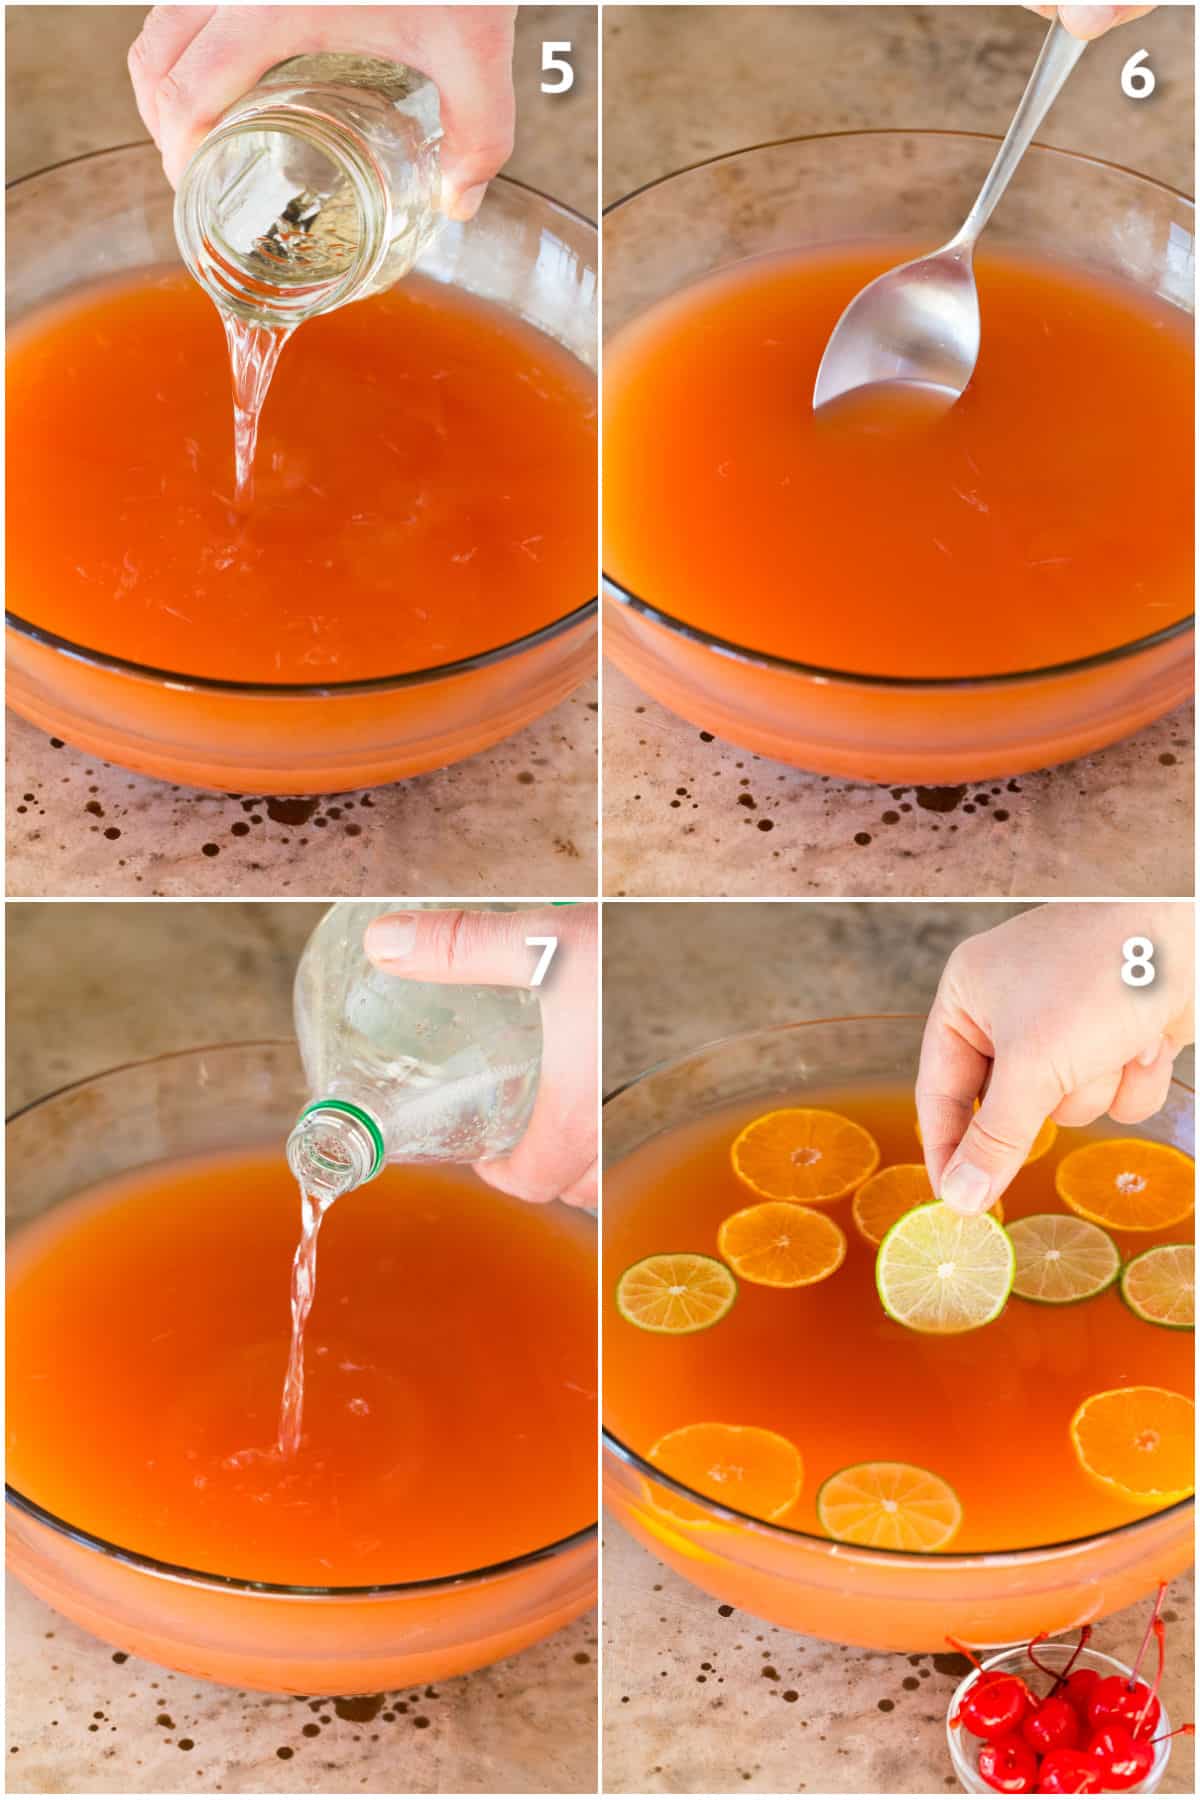 Soda poured into a bowl of liquid, a spoon stirring the drink and a hand putting garnishes into the bowl.